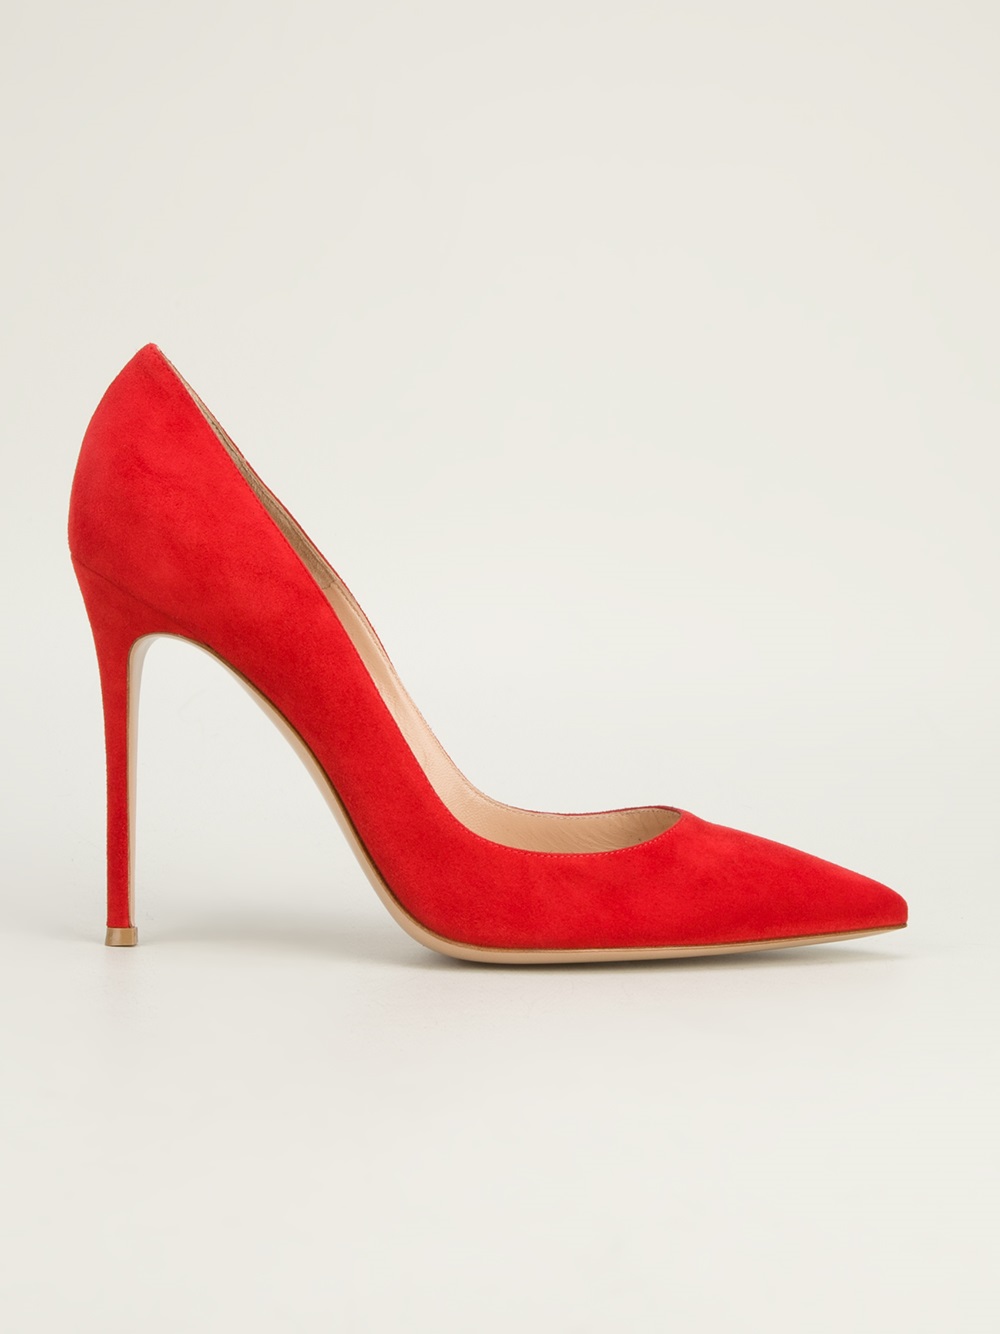 Lyst - Gianvito Rossi Pointed Toe Pump in Red